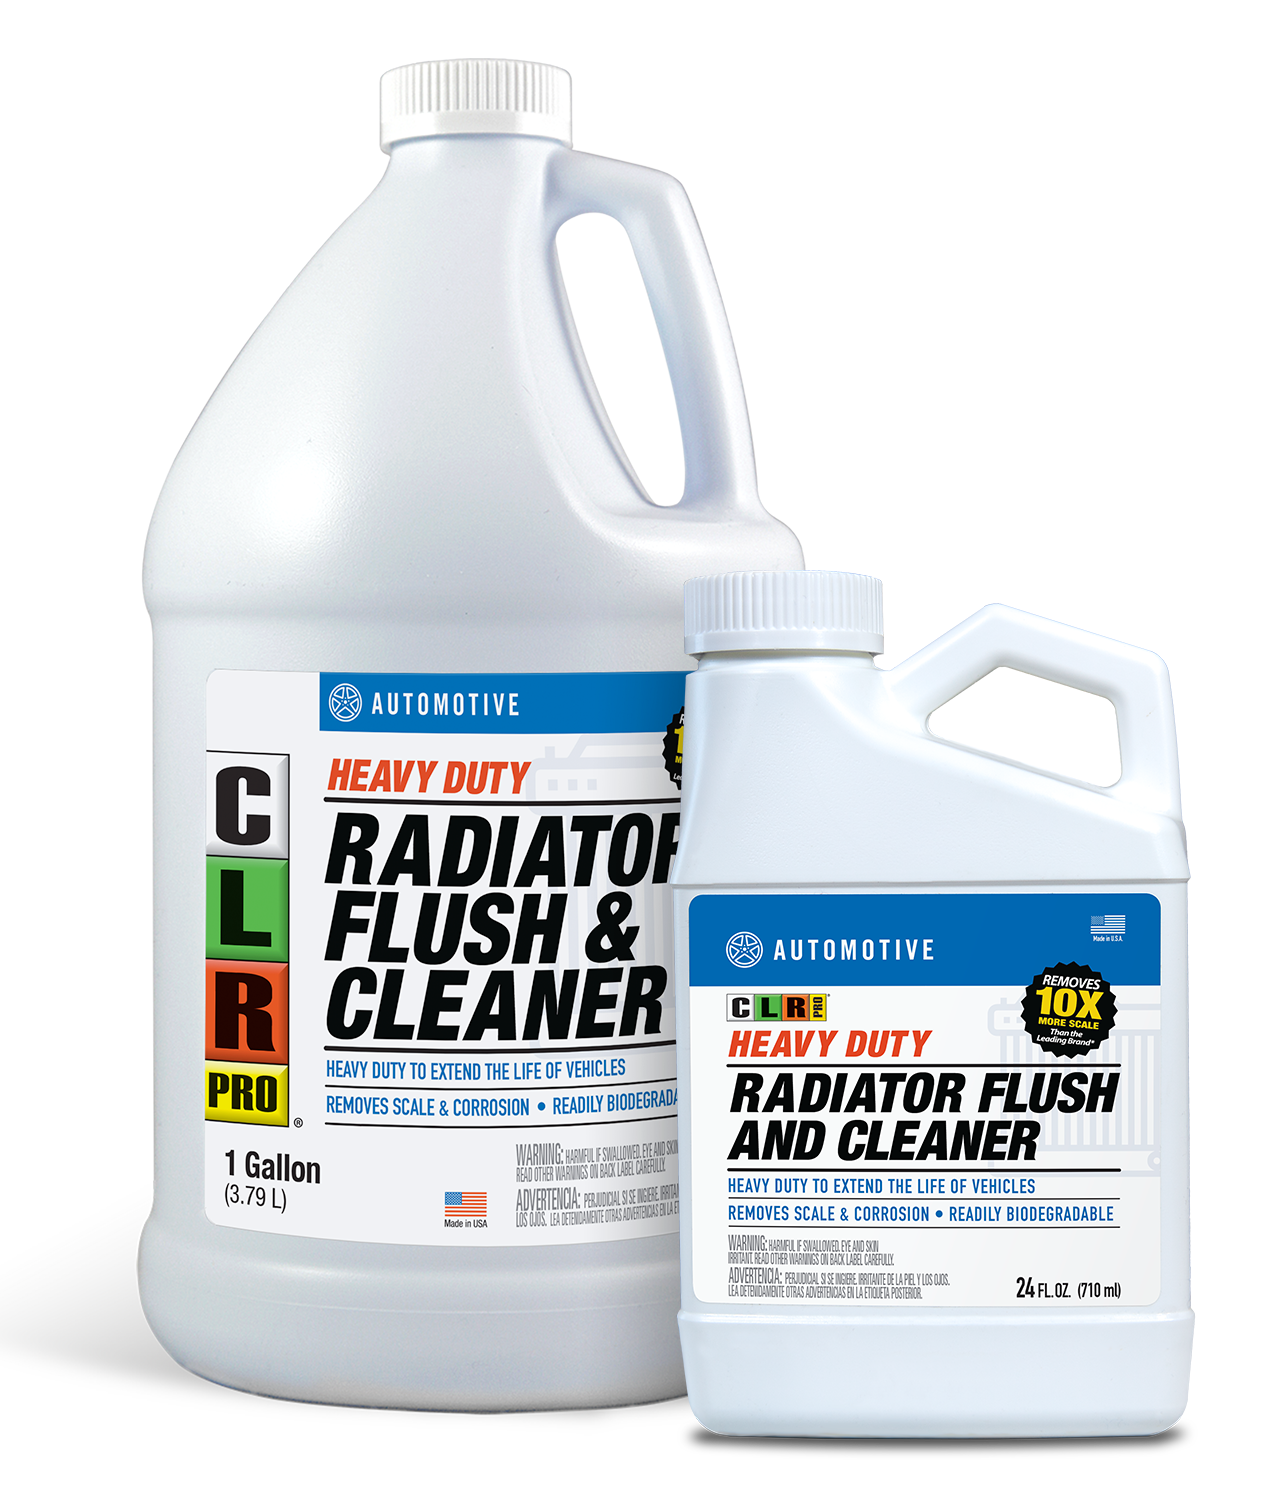 CLR PRO® Heavy Duty Radiator Flush and Cleaner package